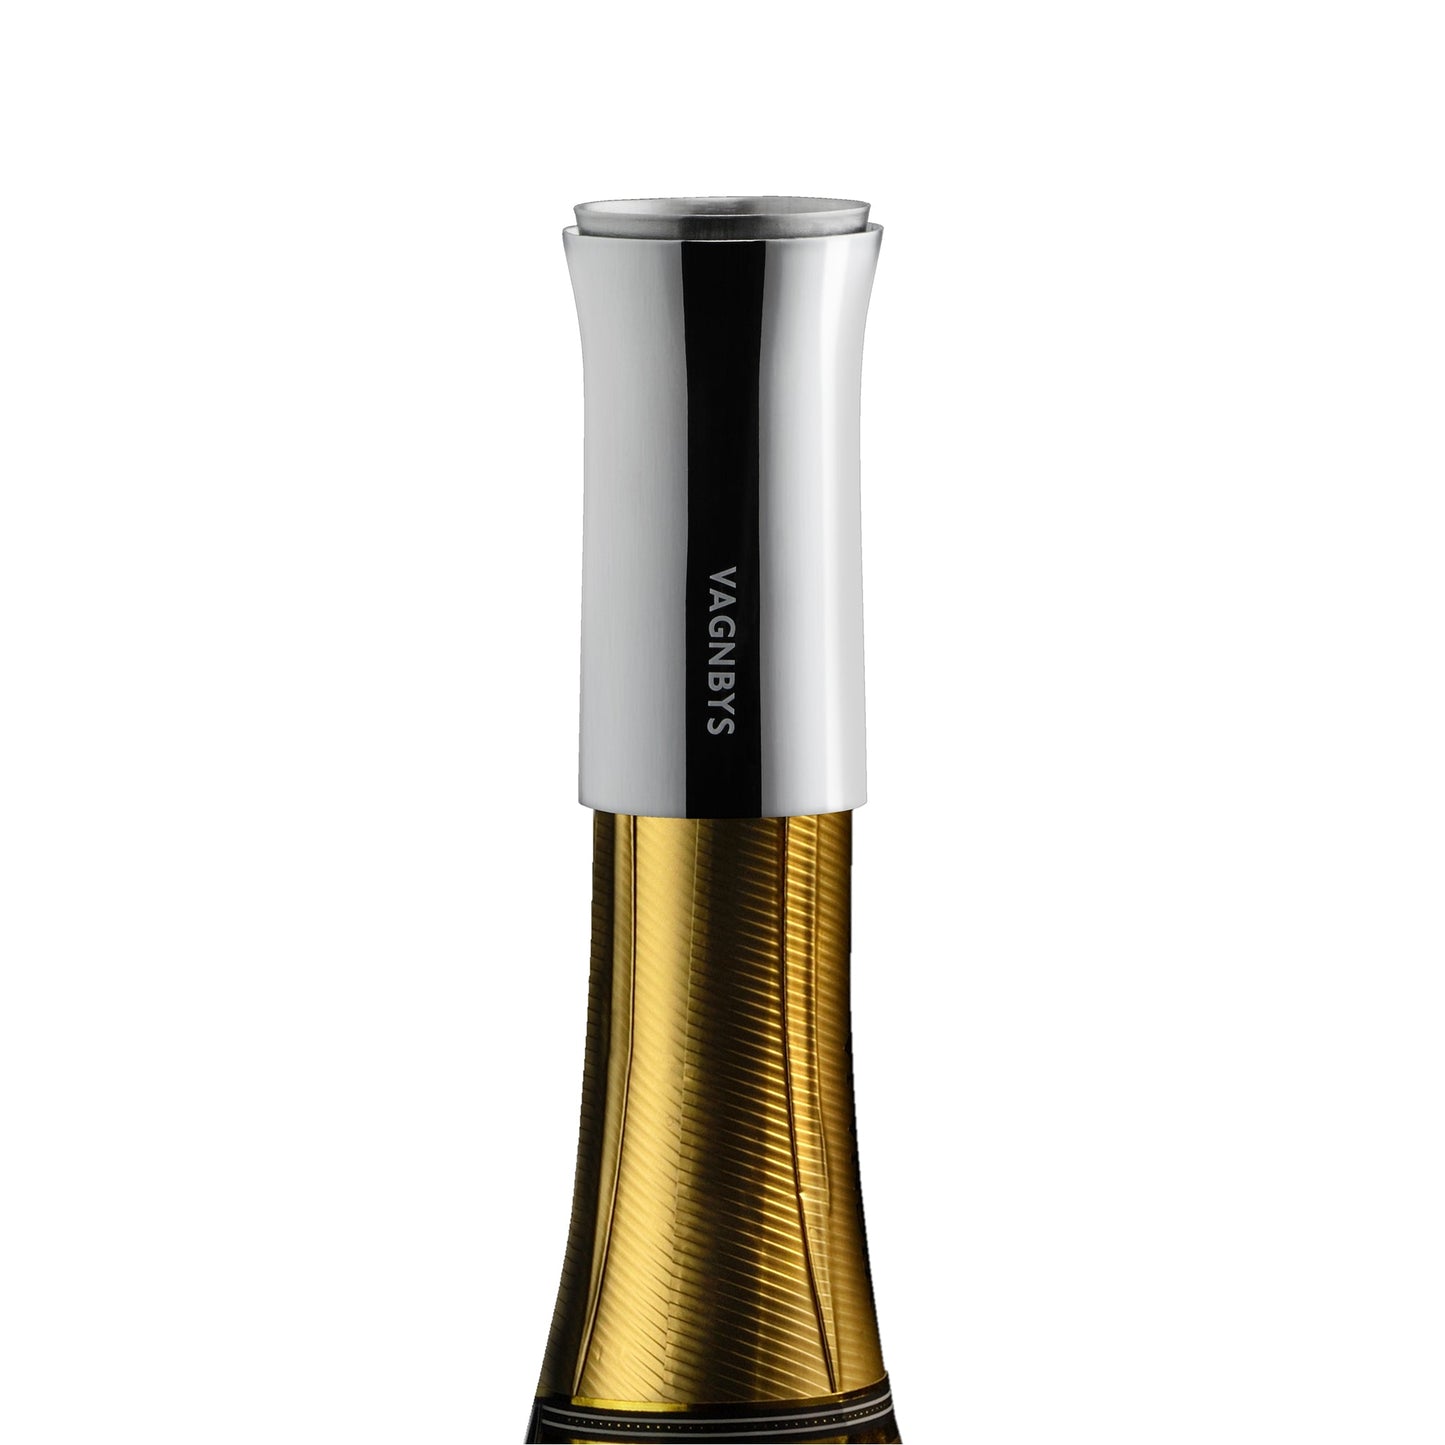 Vagnbys® Champagne Pourer by Ethan+Ashe